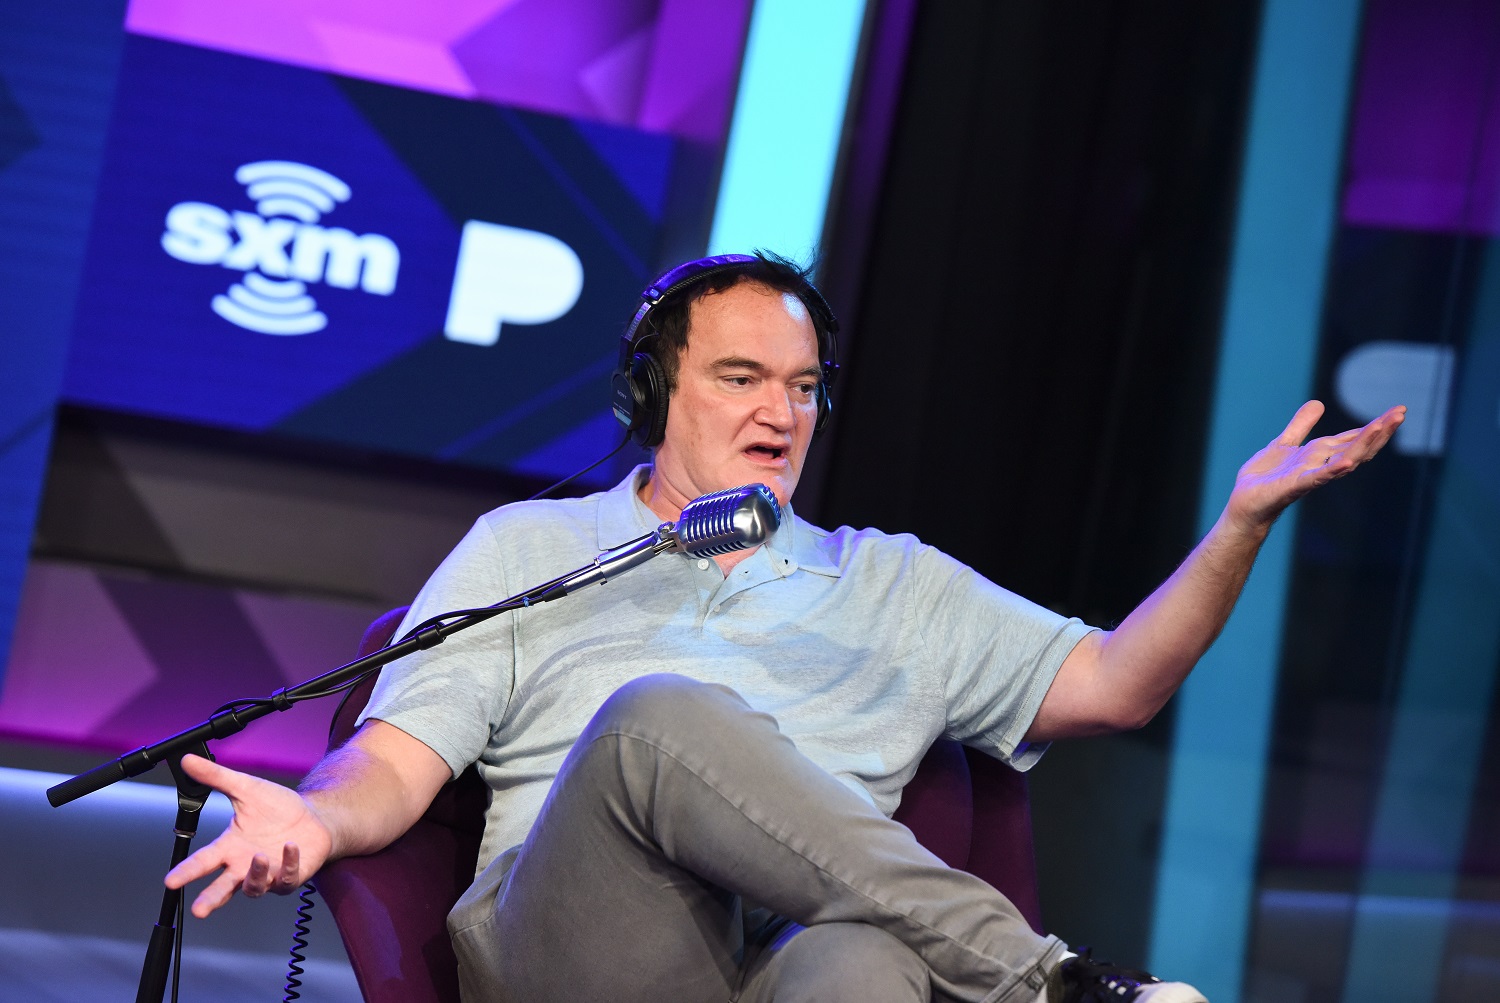 Quentin Tarantino sits in a chair and speaks into a microphone during an interview.